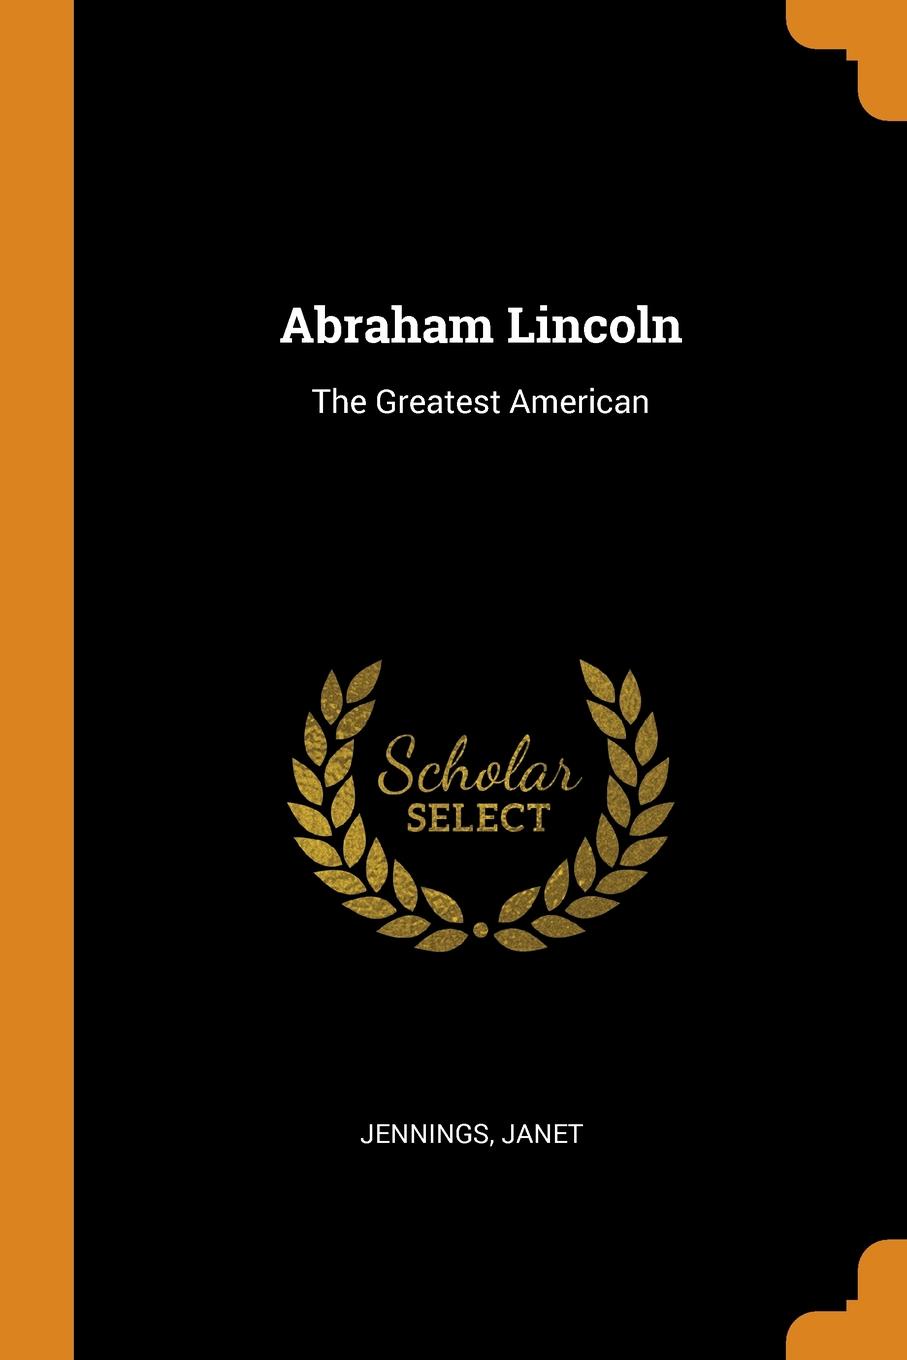 Abraham Lincoln. The Greatest American